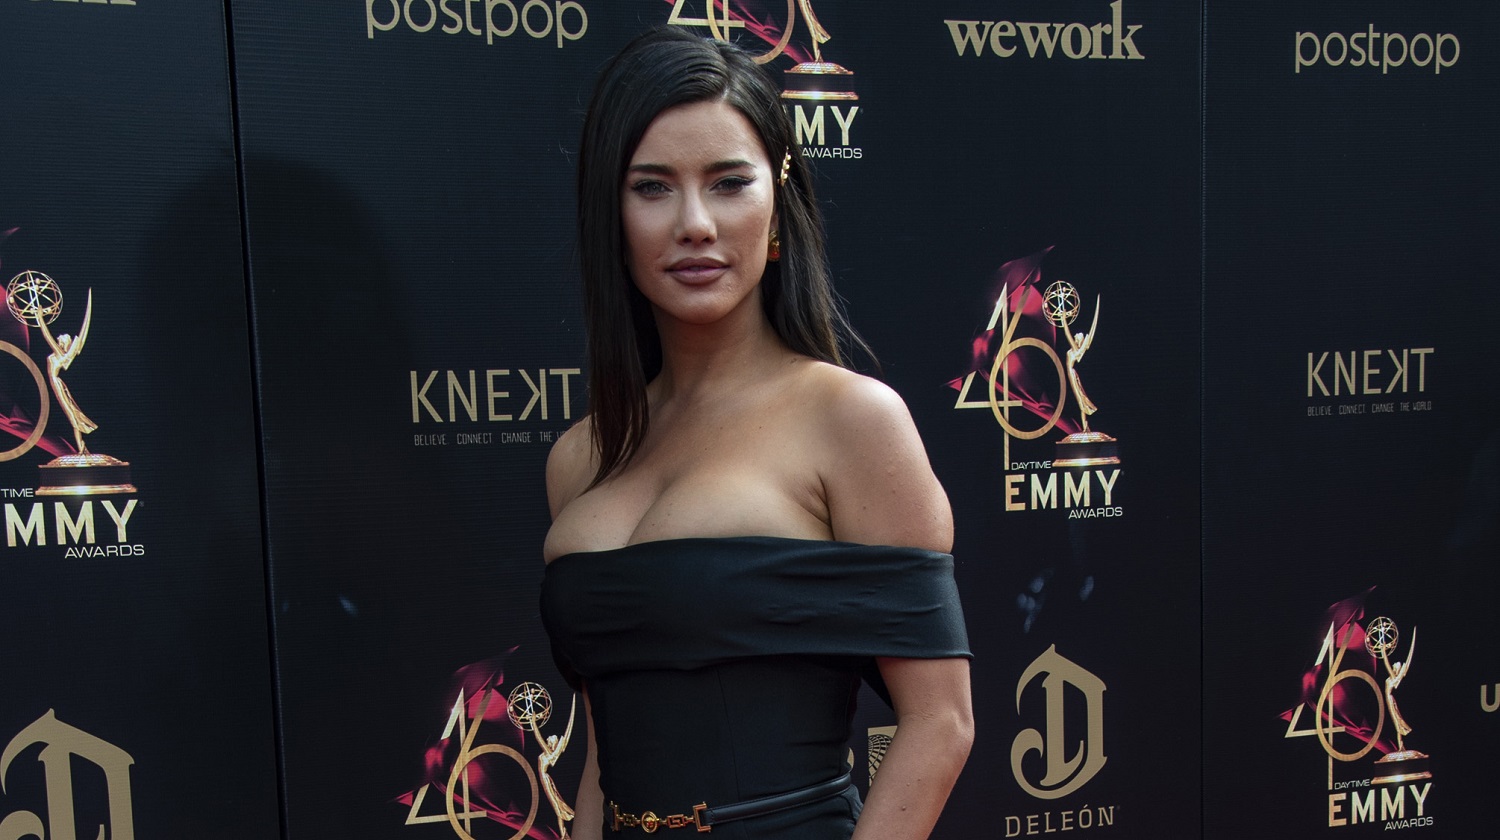 The Bold and the Beautiful speculation focuses on Jacqueline MacInnes Wood's character of Steffy Forrester, pictured here in a black dress against a black background